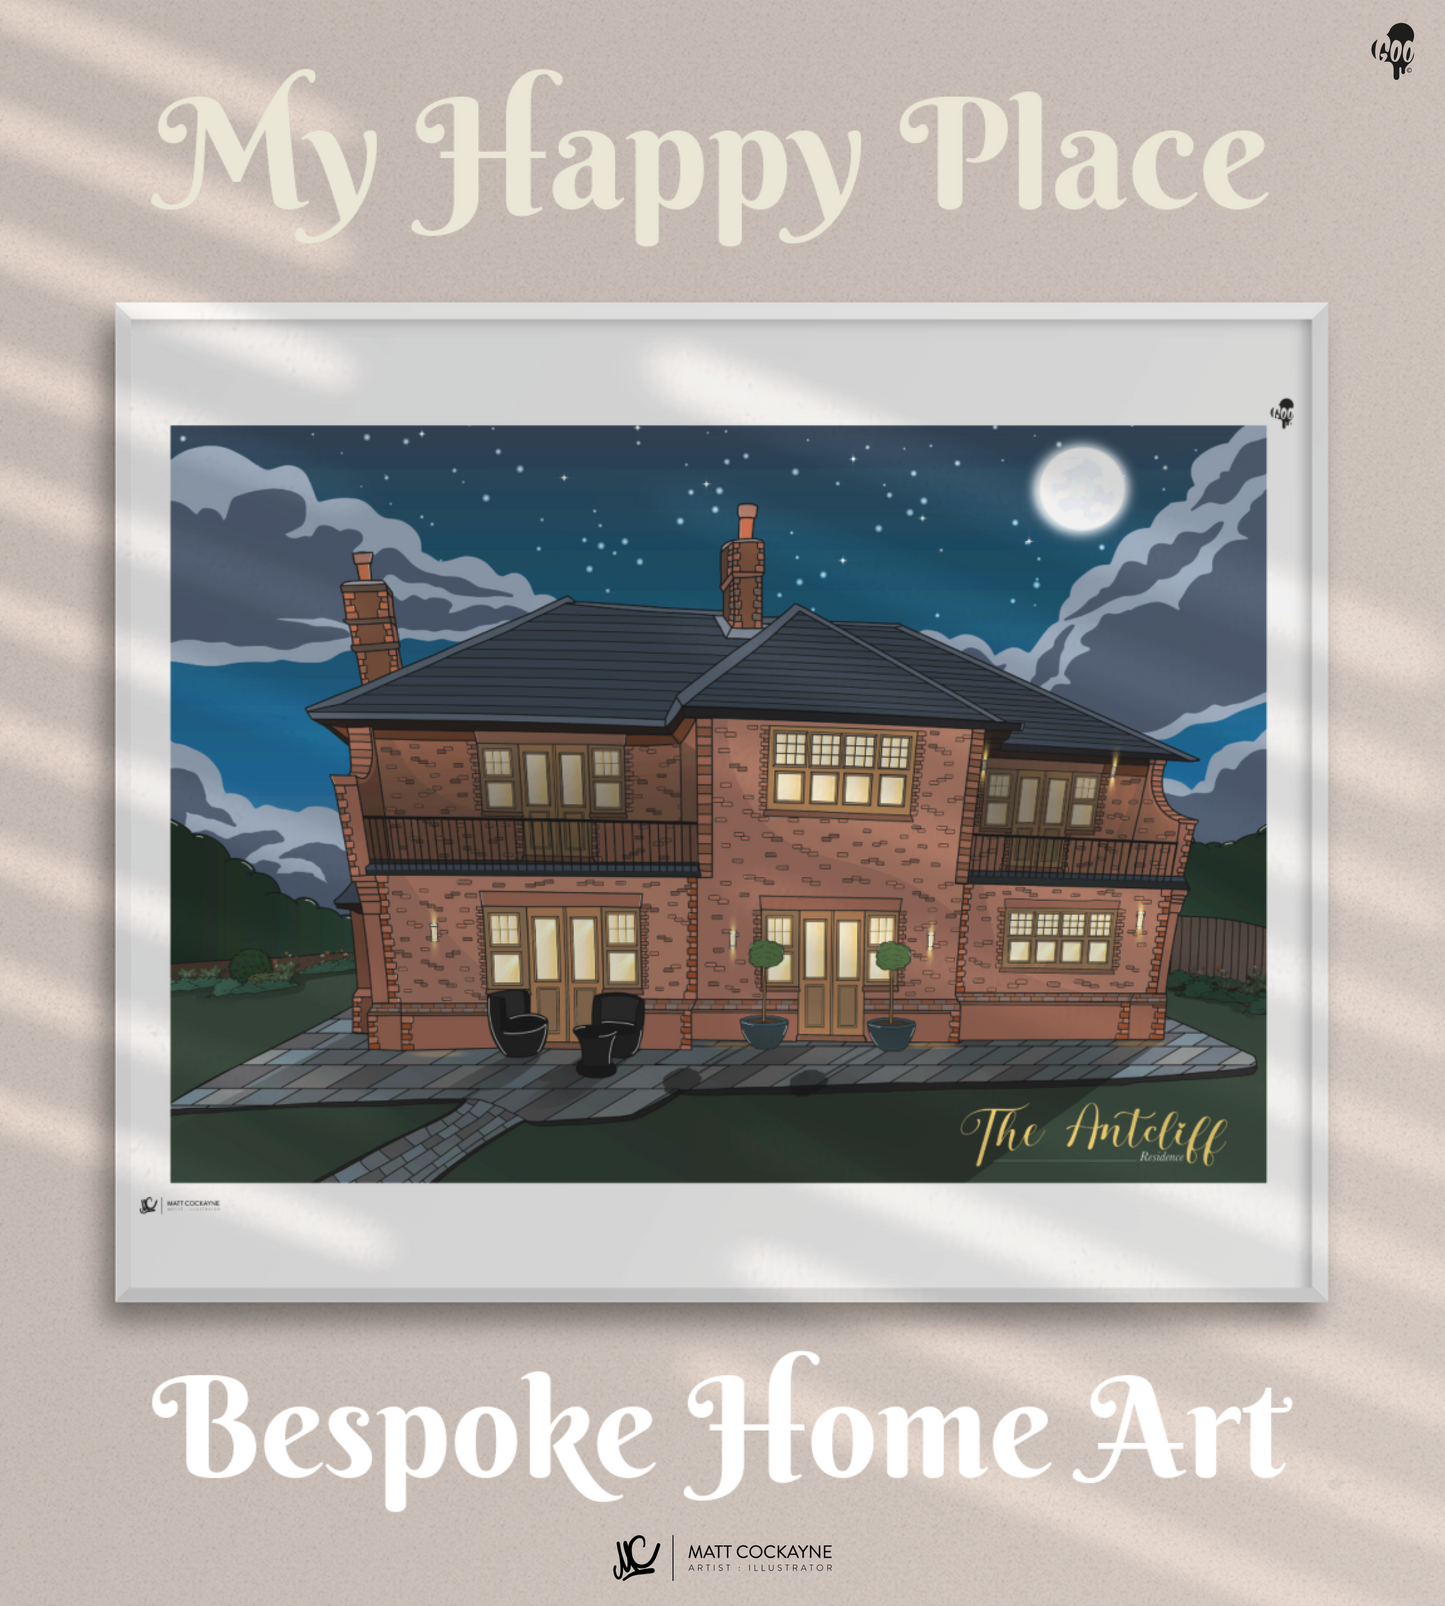 Your Home -  BESPOKE ARTWORK COMMISSION